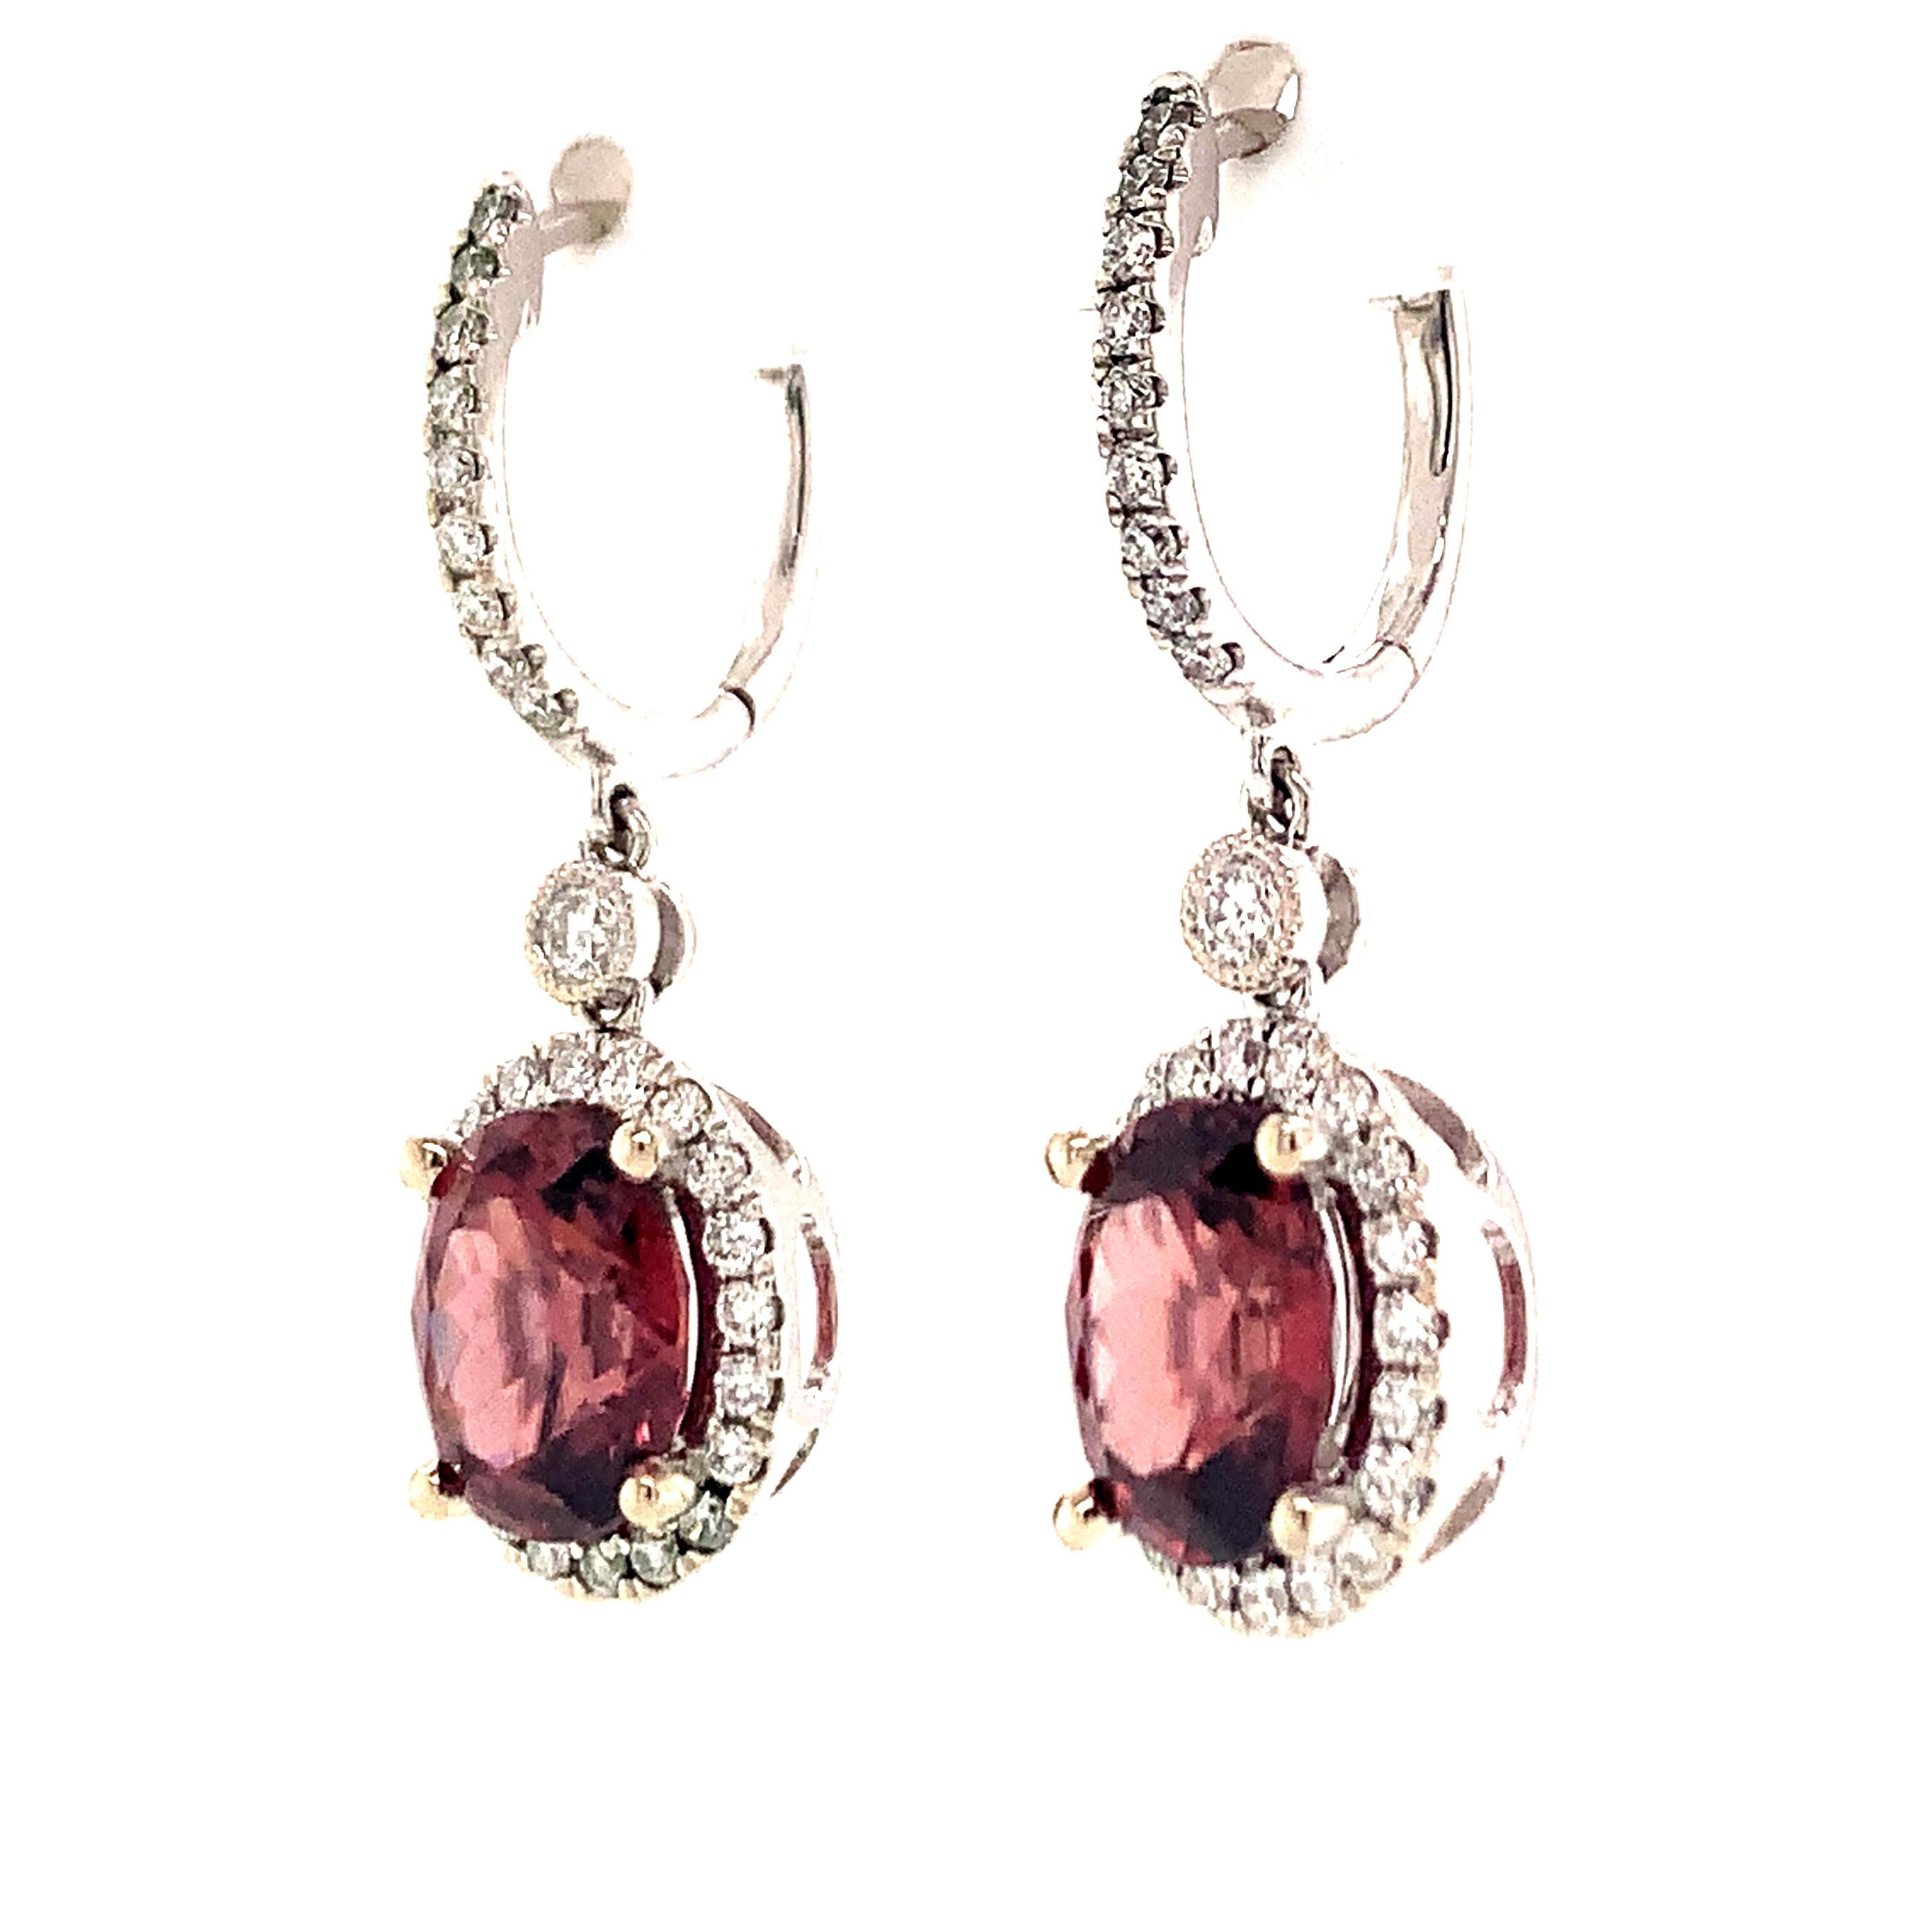 Natural Tourmaline Rubellite Diamond Earrings 18k Gold 6.62 TCW Certified For Sale 1